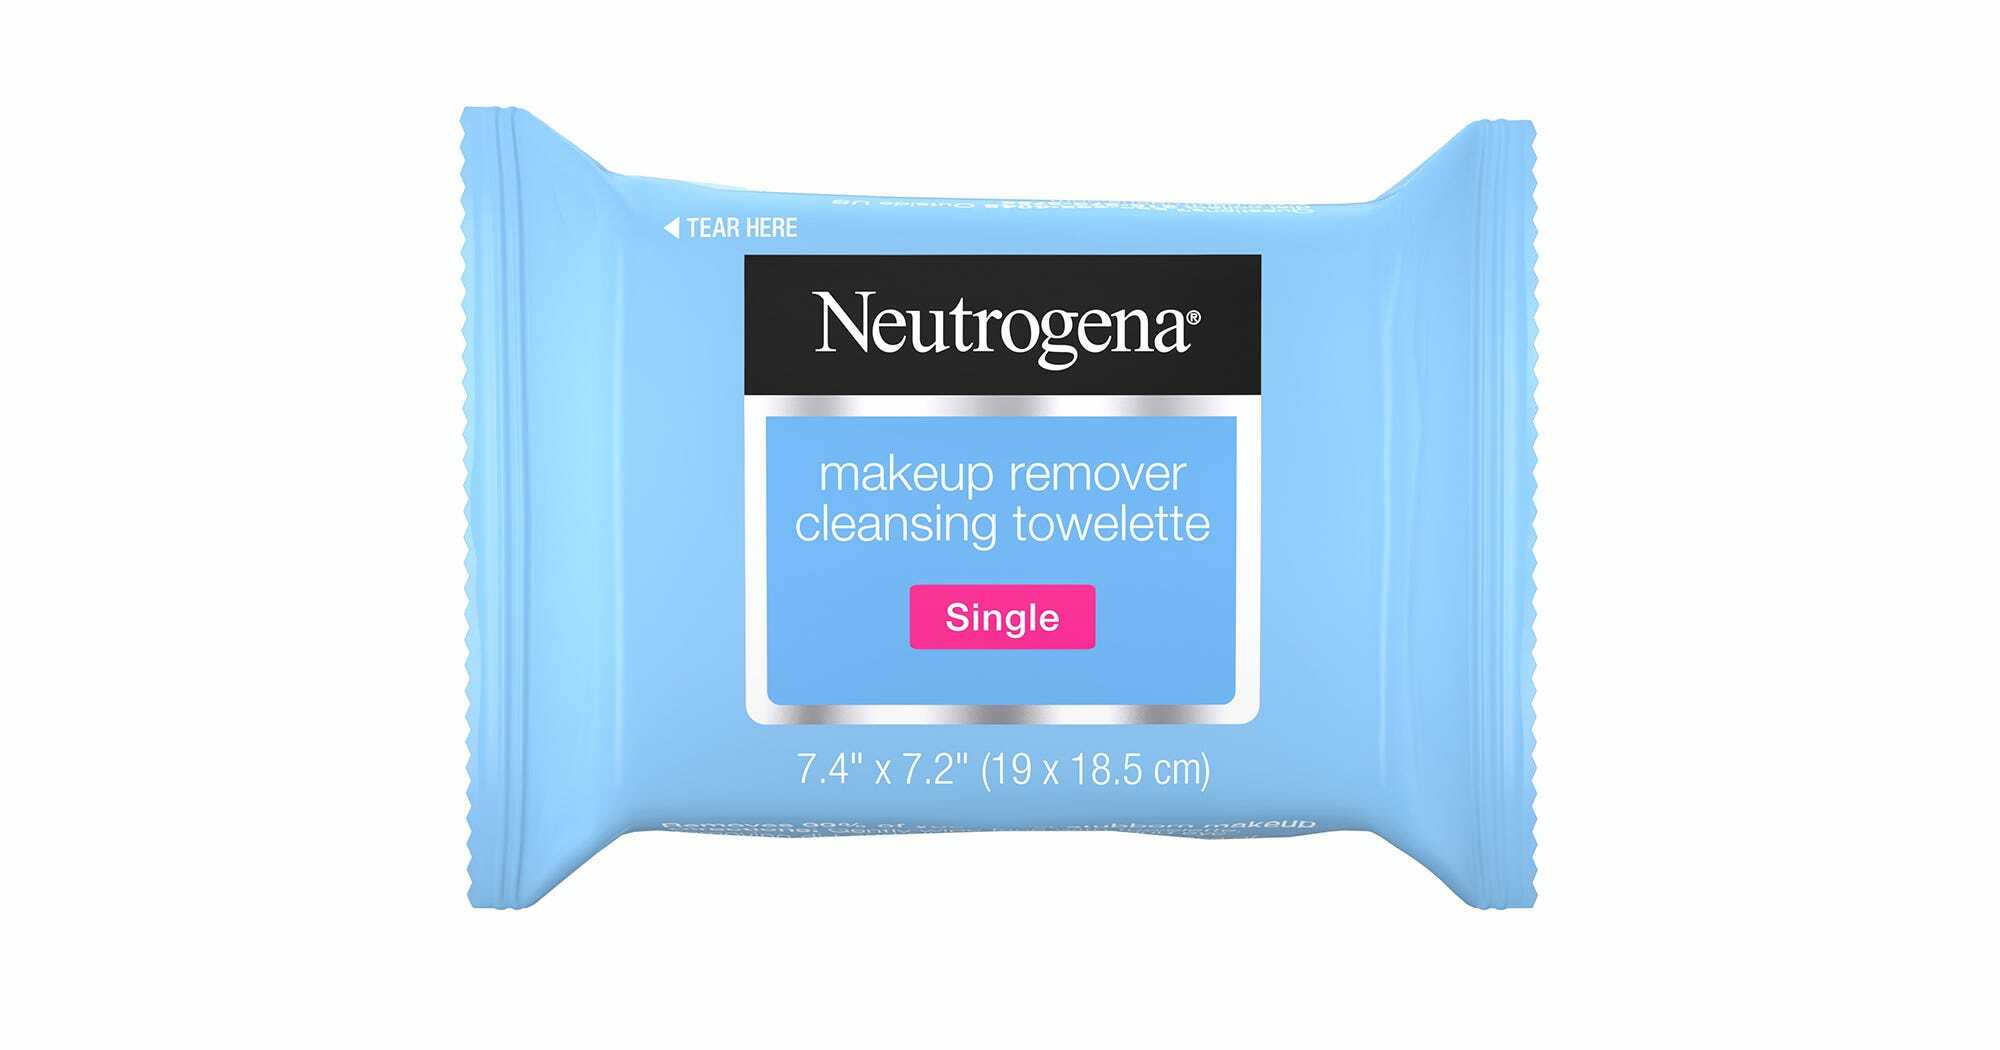 Neutrogena Makeup Remover Cleansing Towelette Single